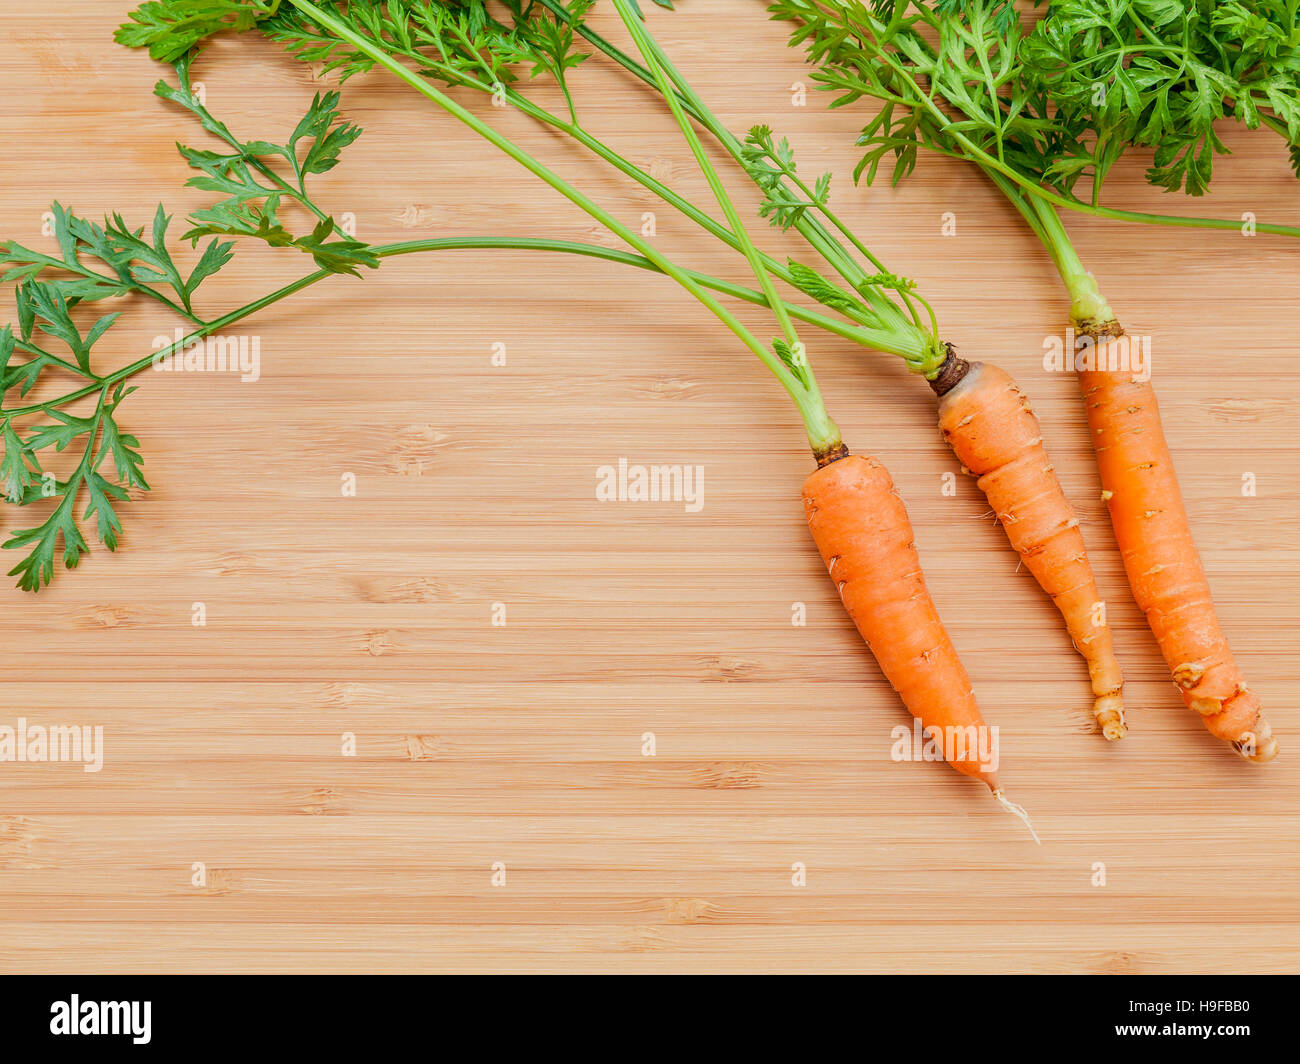 Fresh carrots bunch on wooden table. Raw fresh carrots with tail Stock Photo